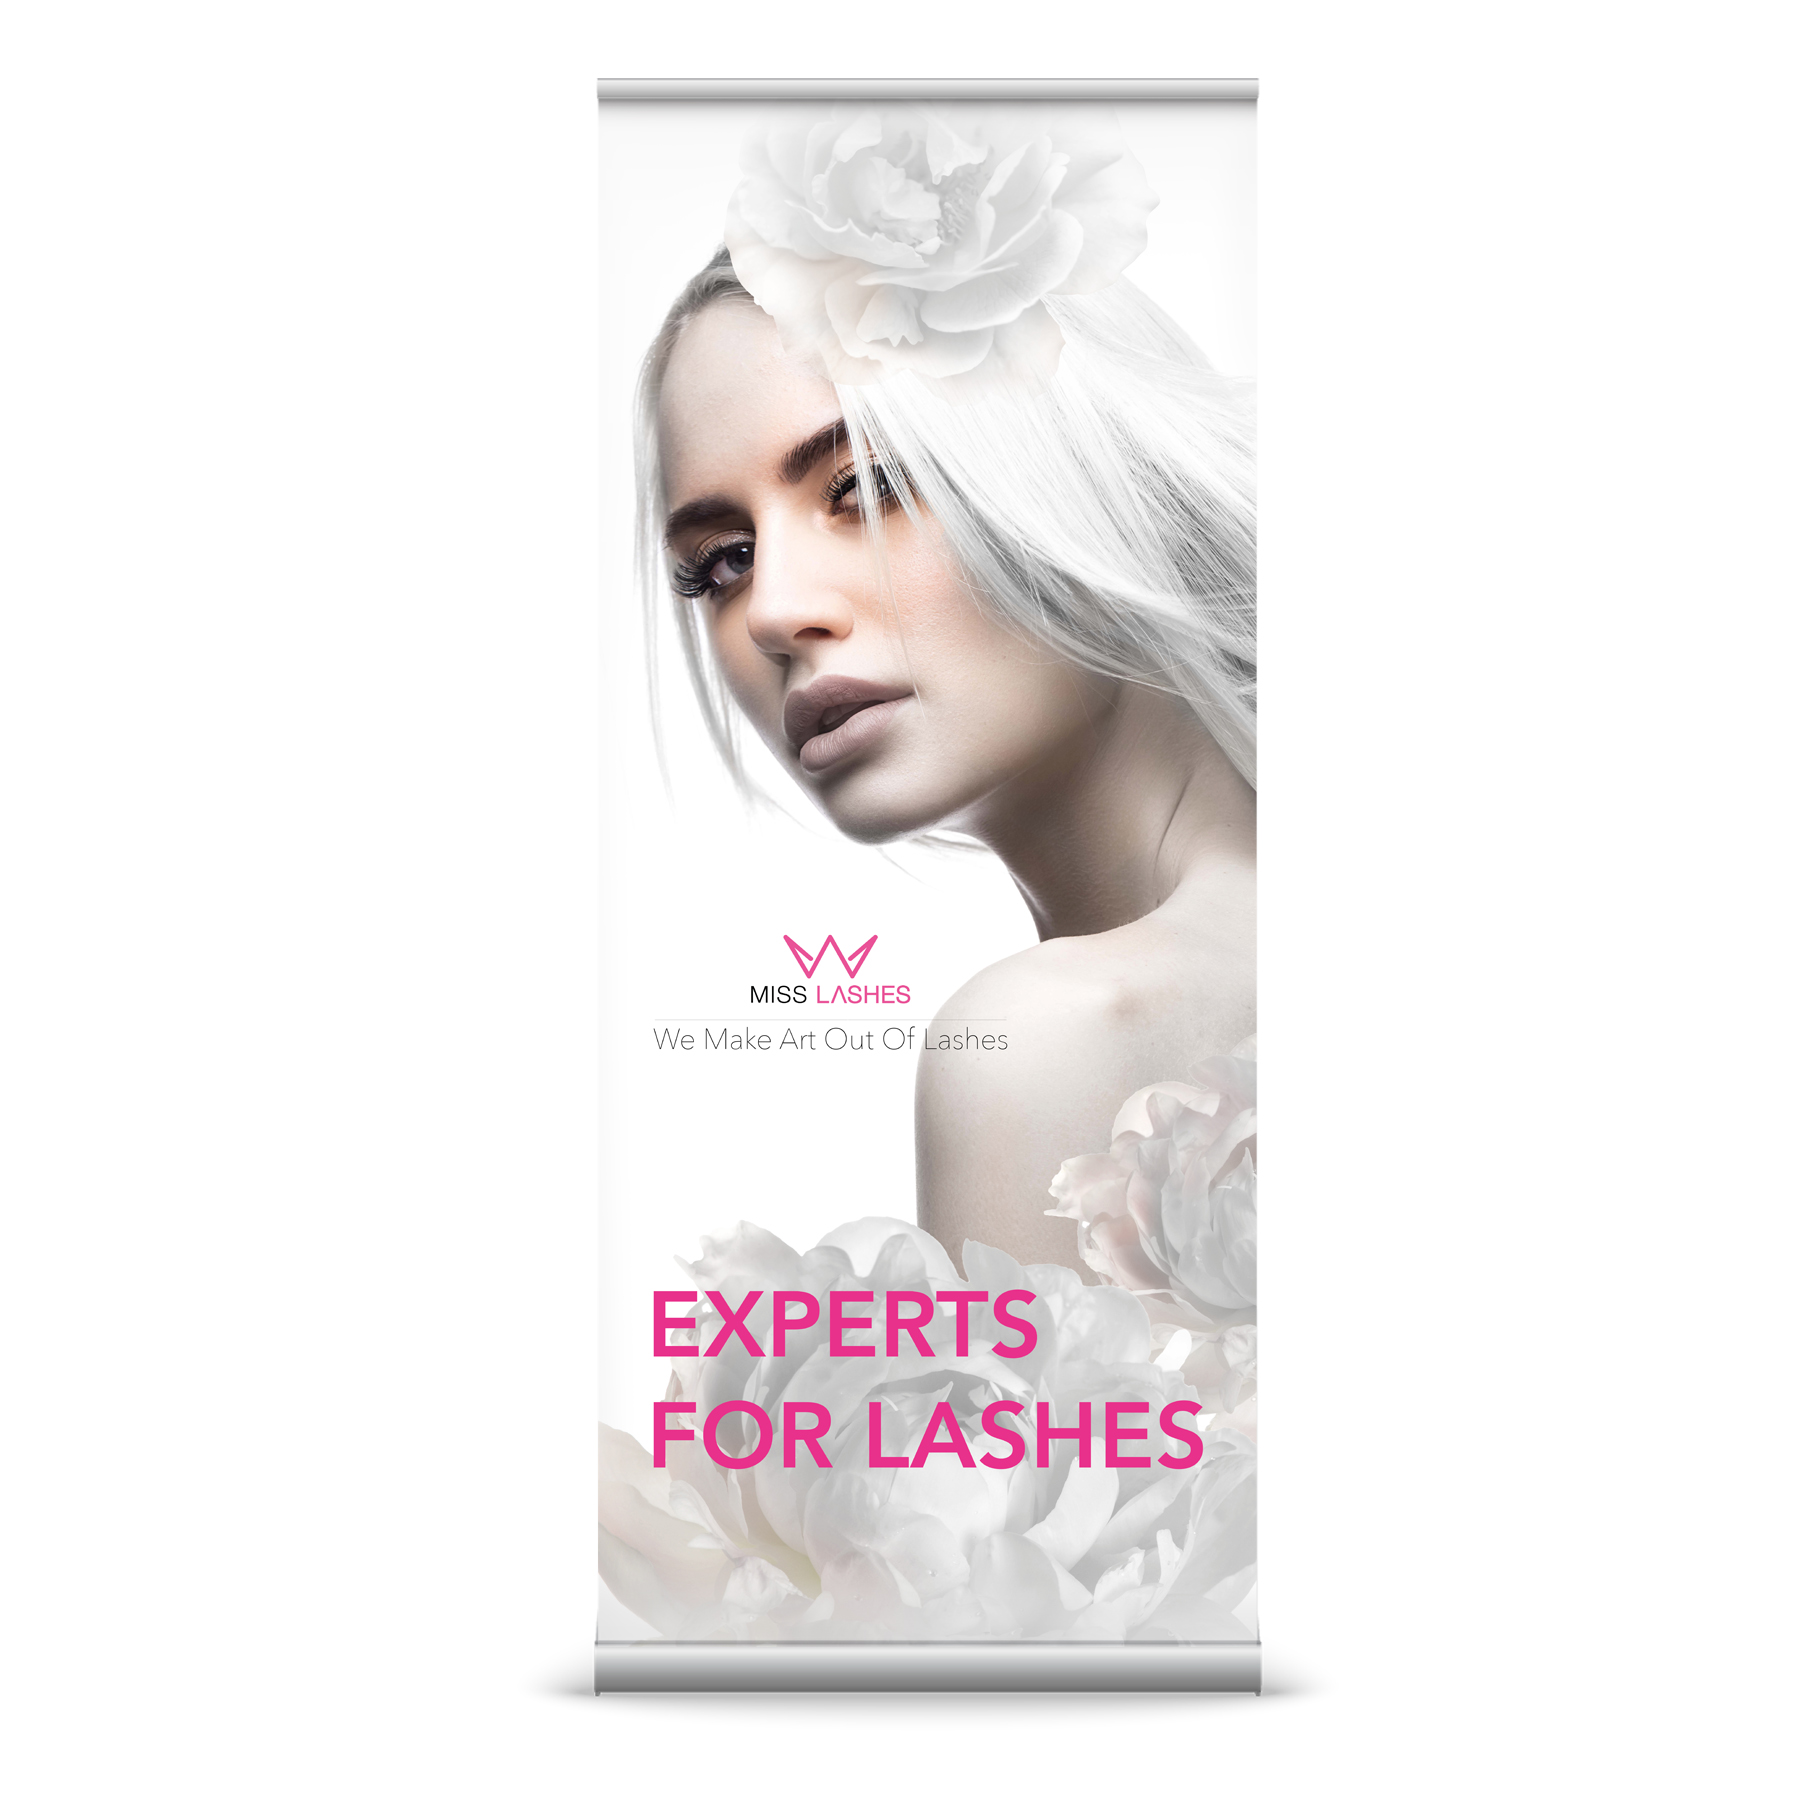 "Experts for lashes" | Rollup Banner | 1 Piece